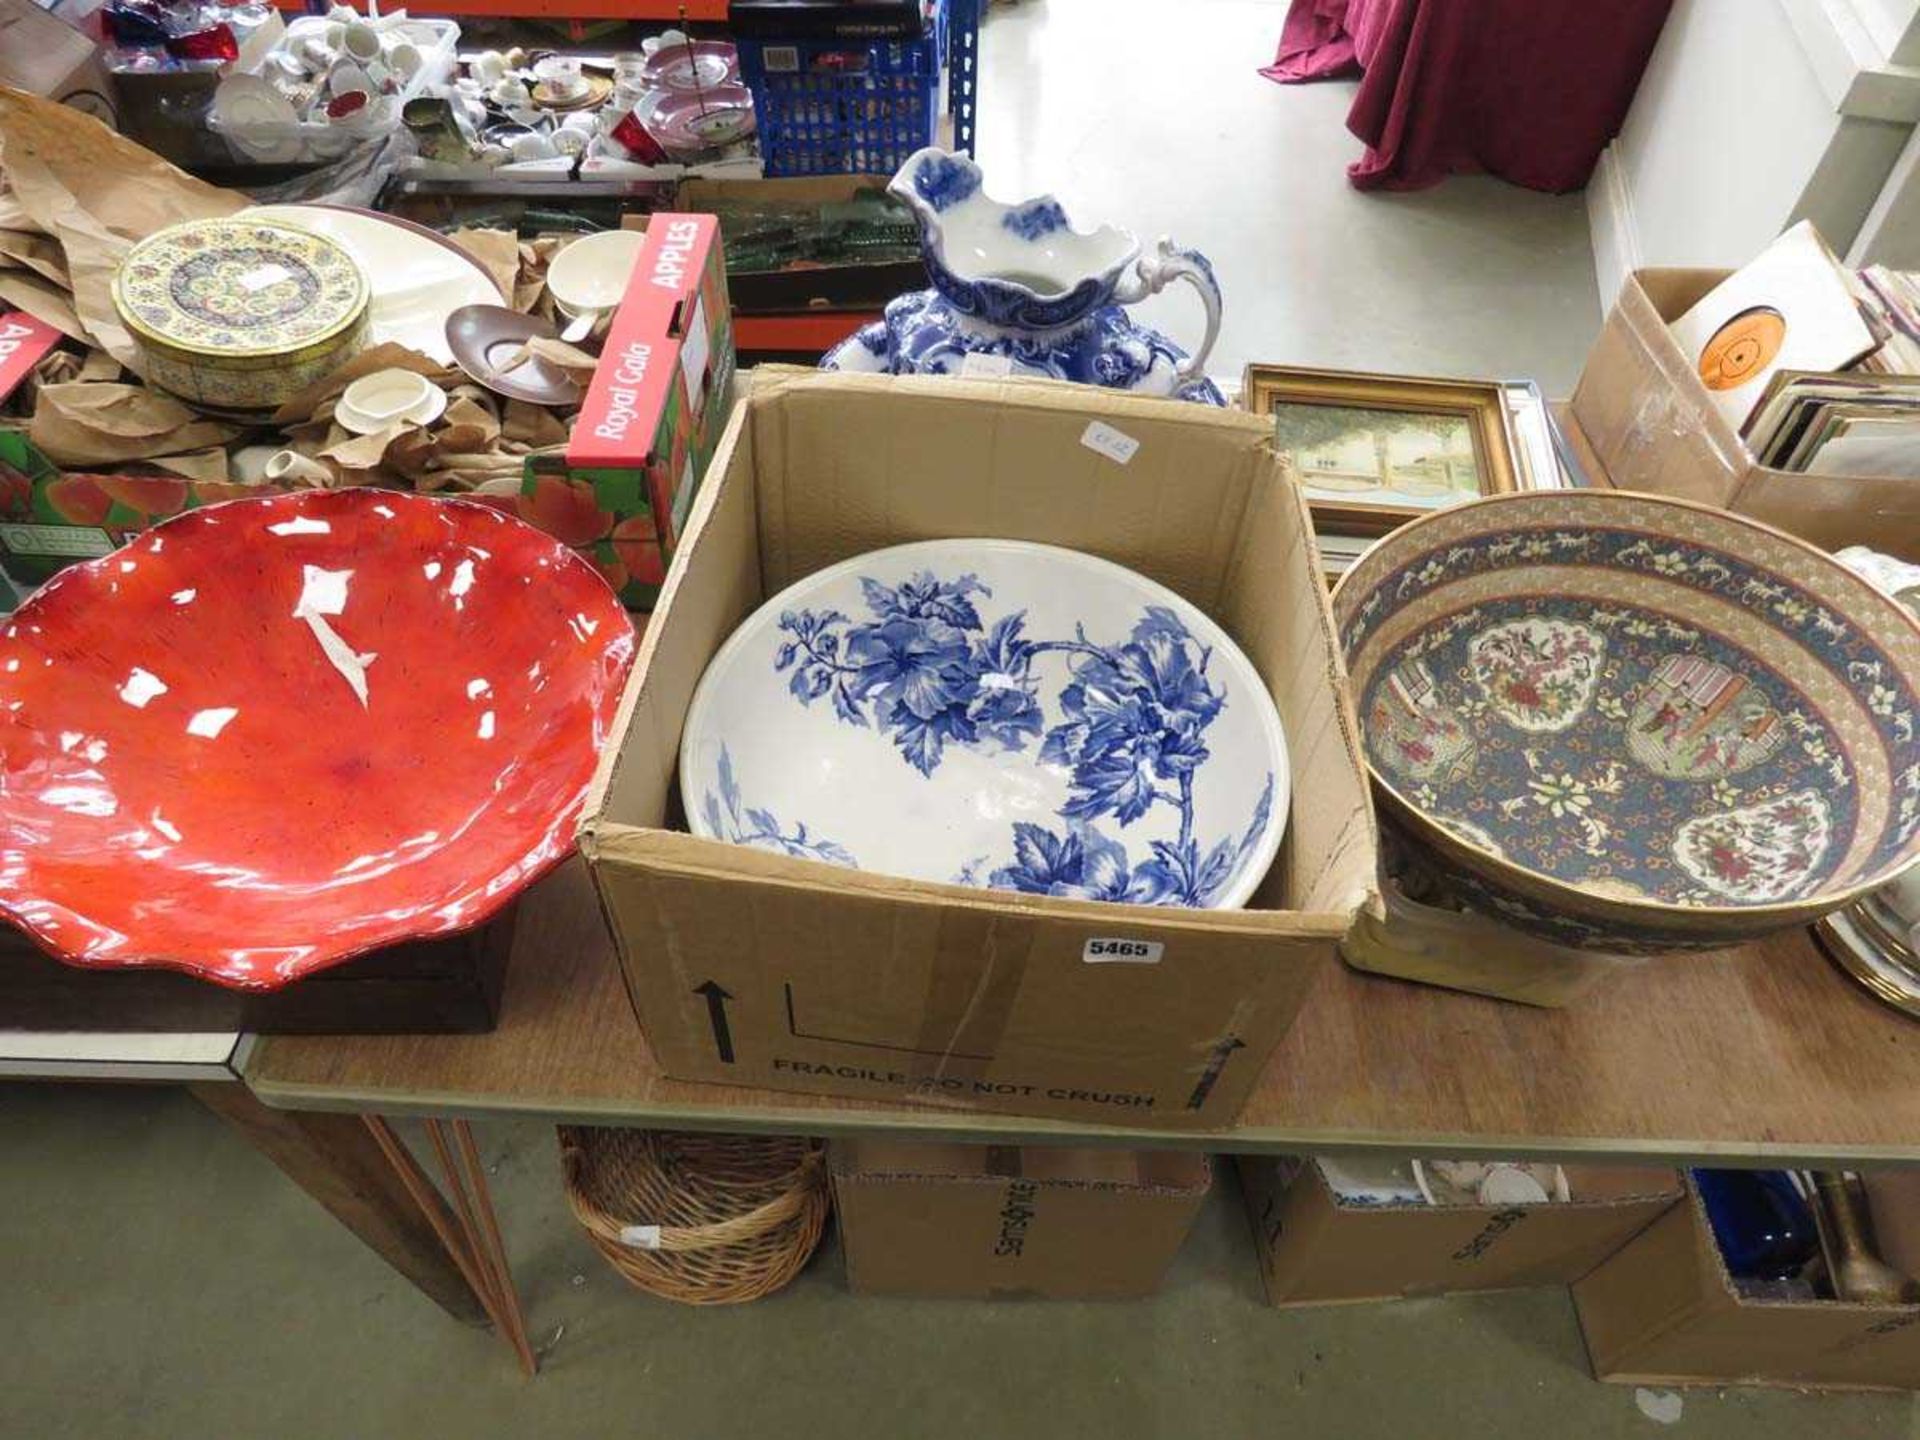 Box containing 3 floral patterned and red glazed bowls